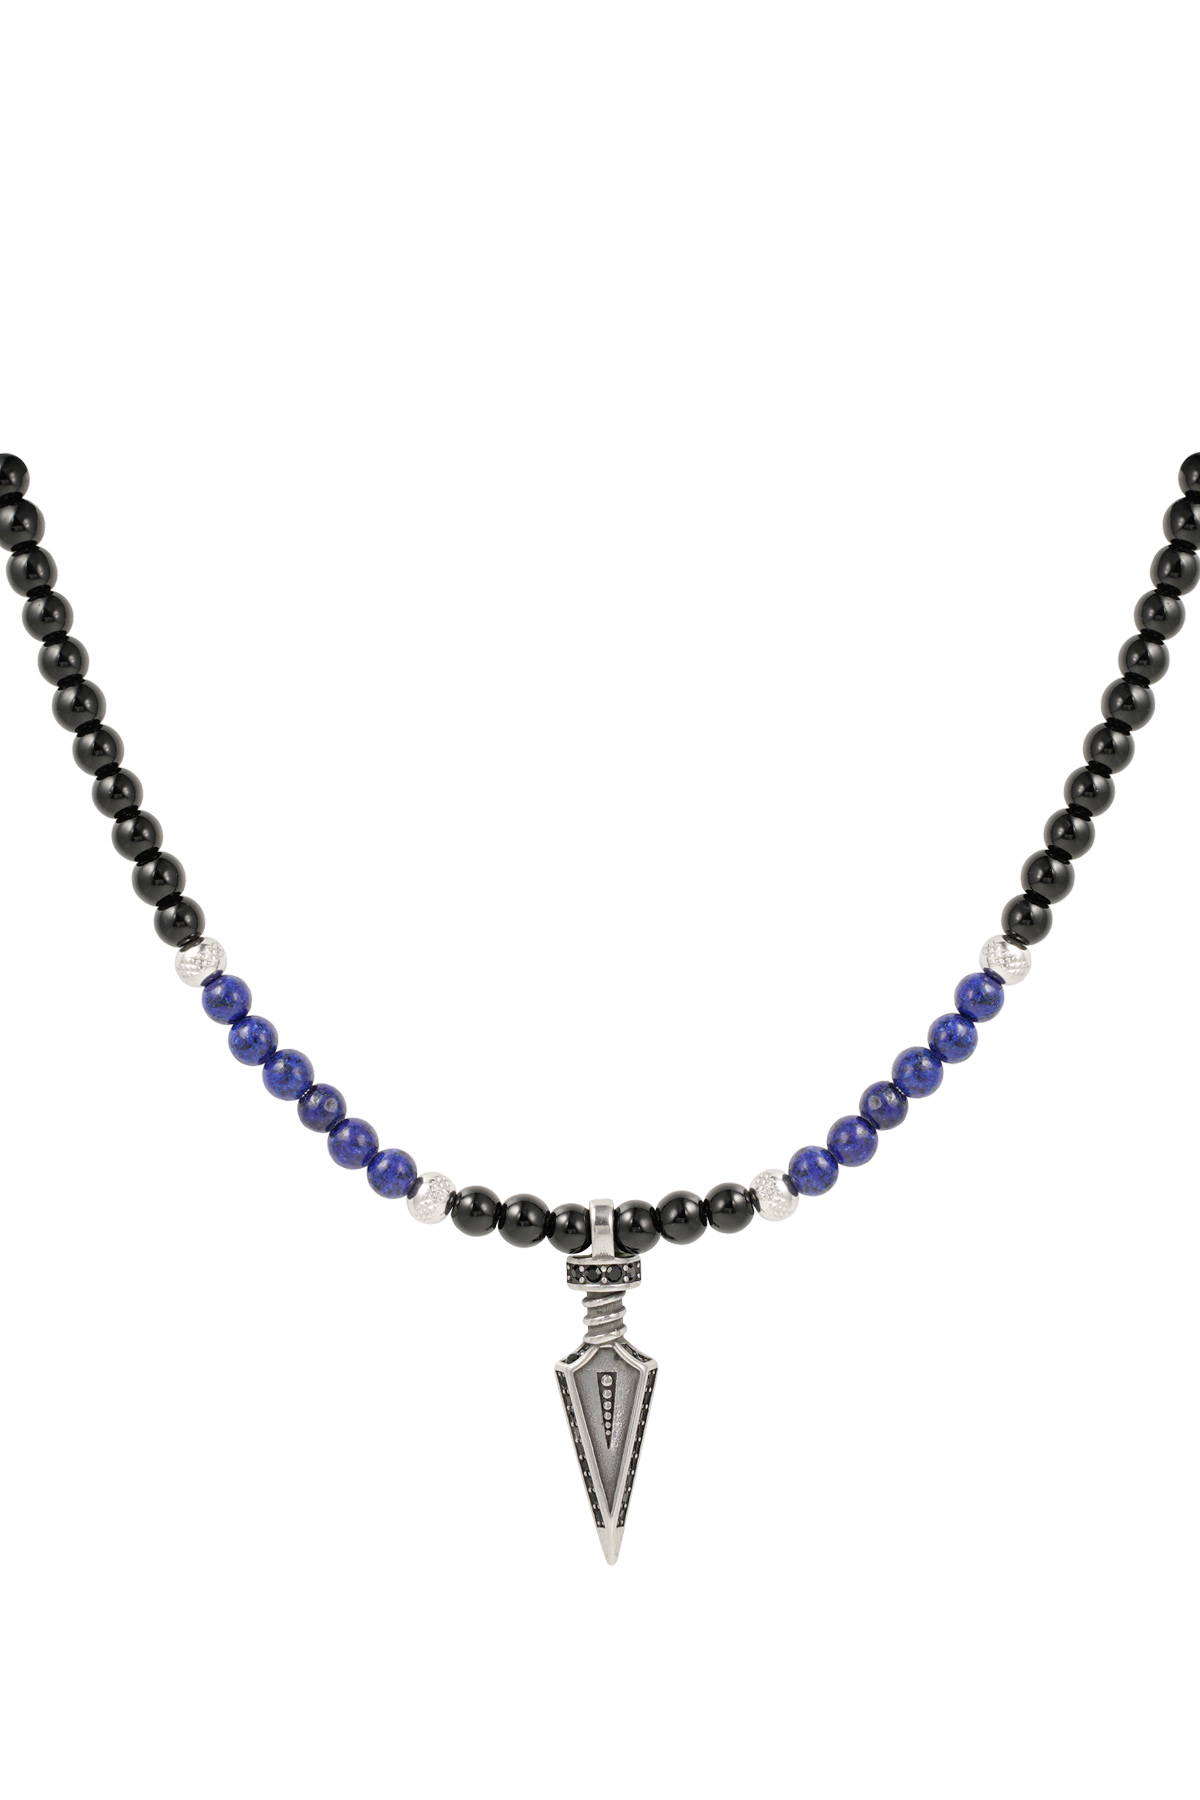 Men's necklace beads with charm - blue h5 